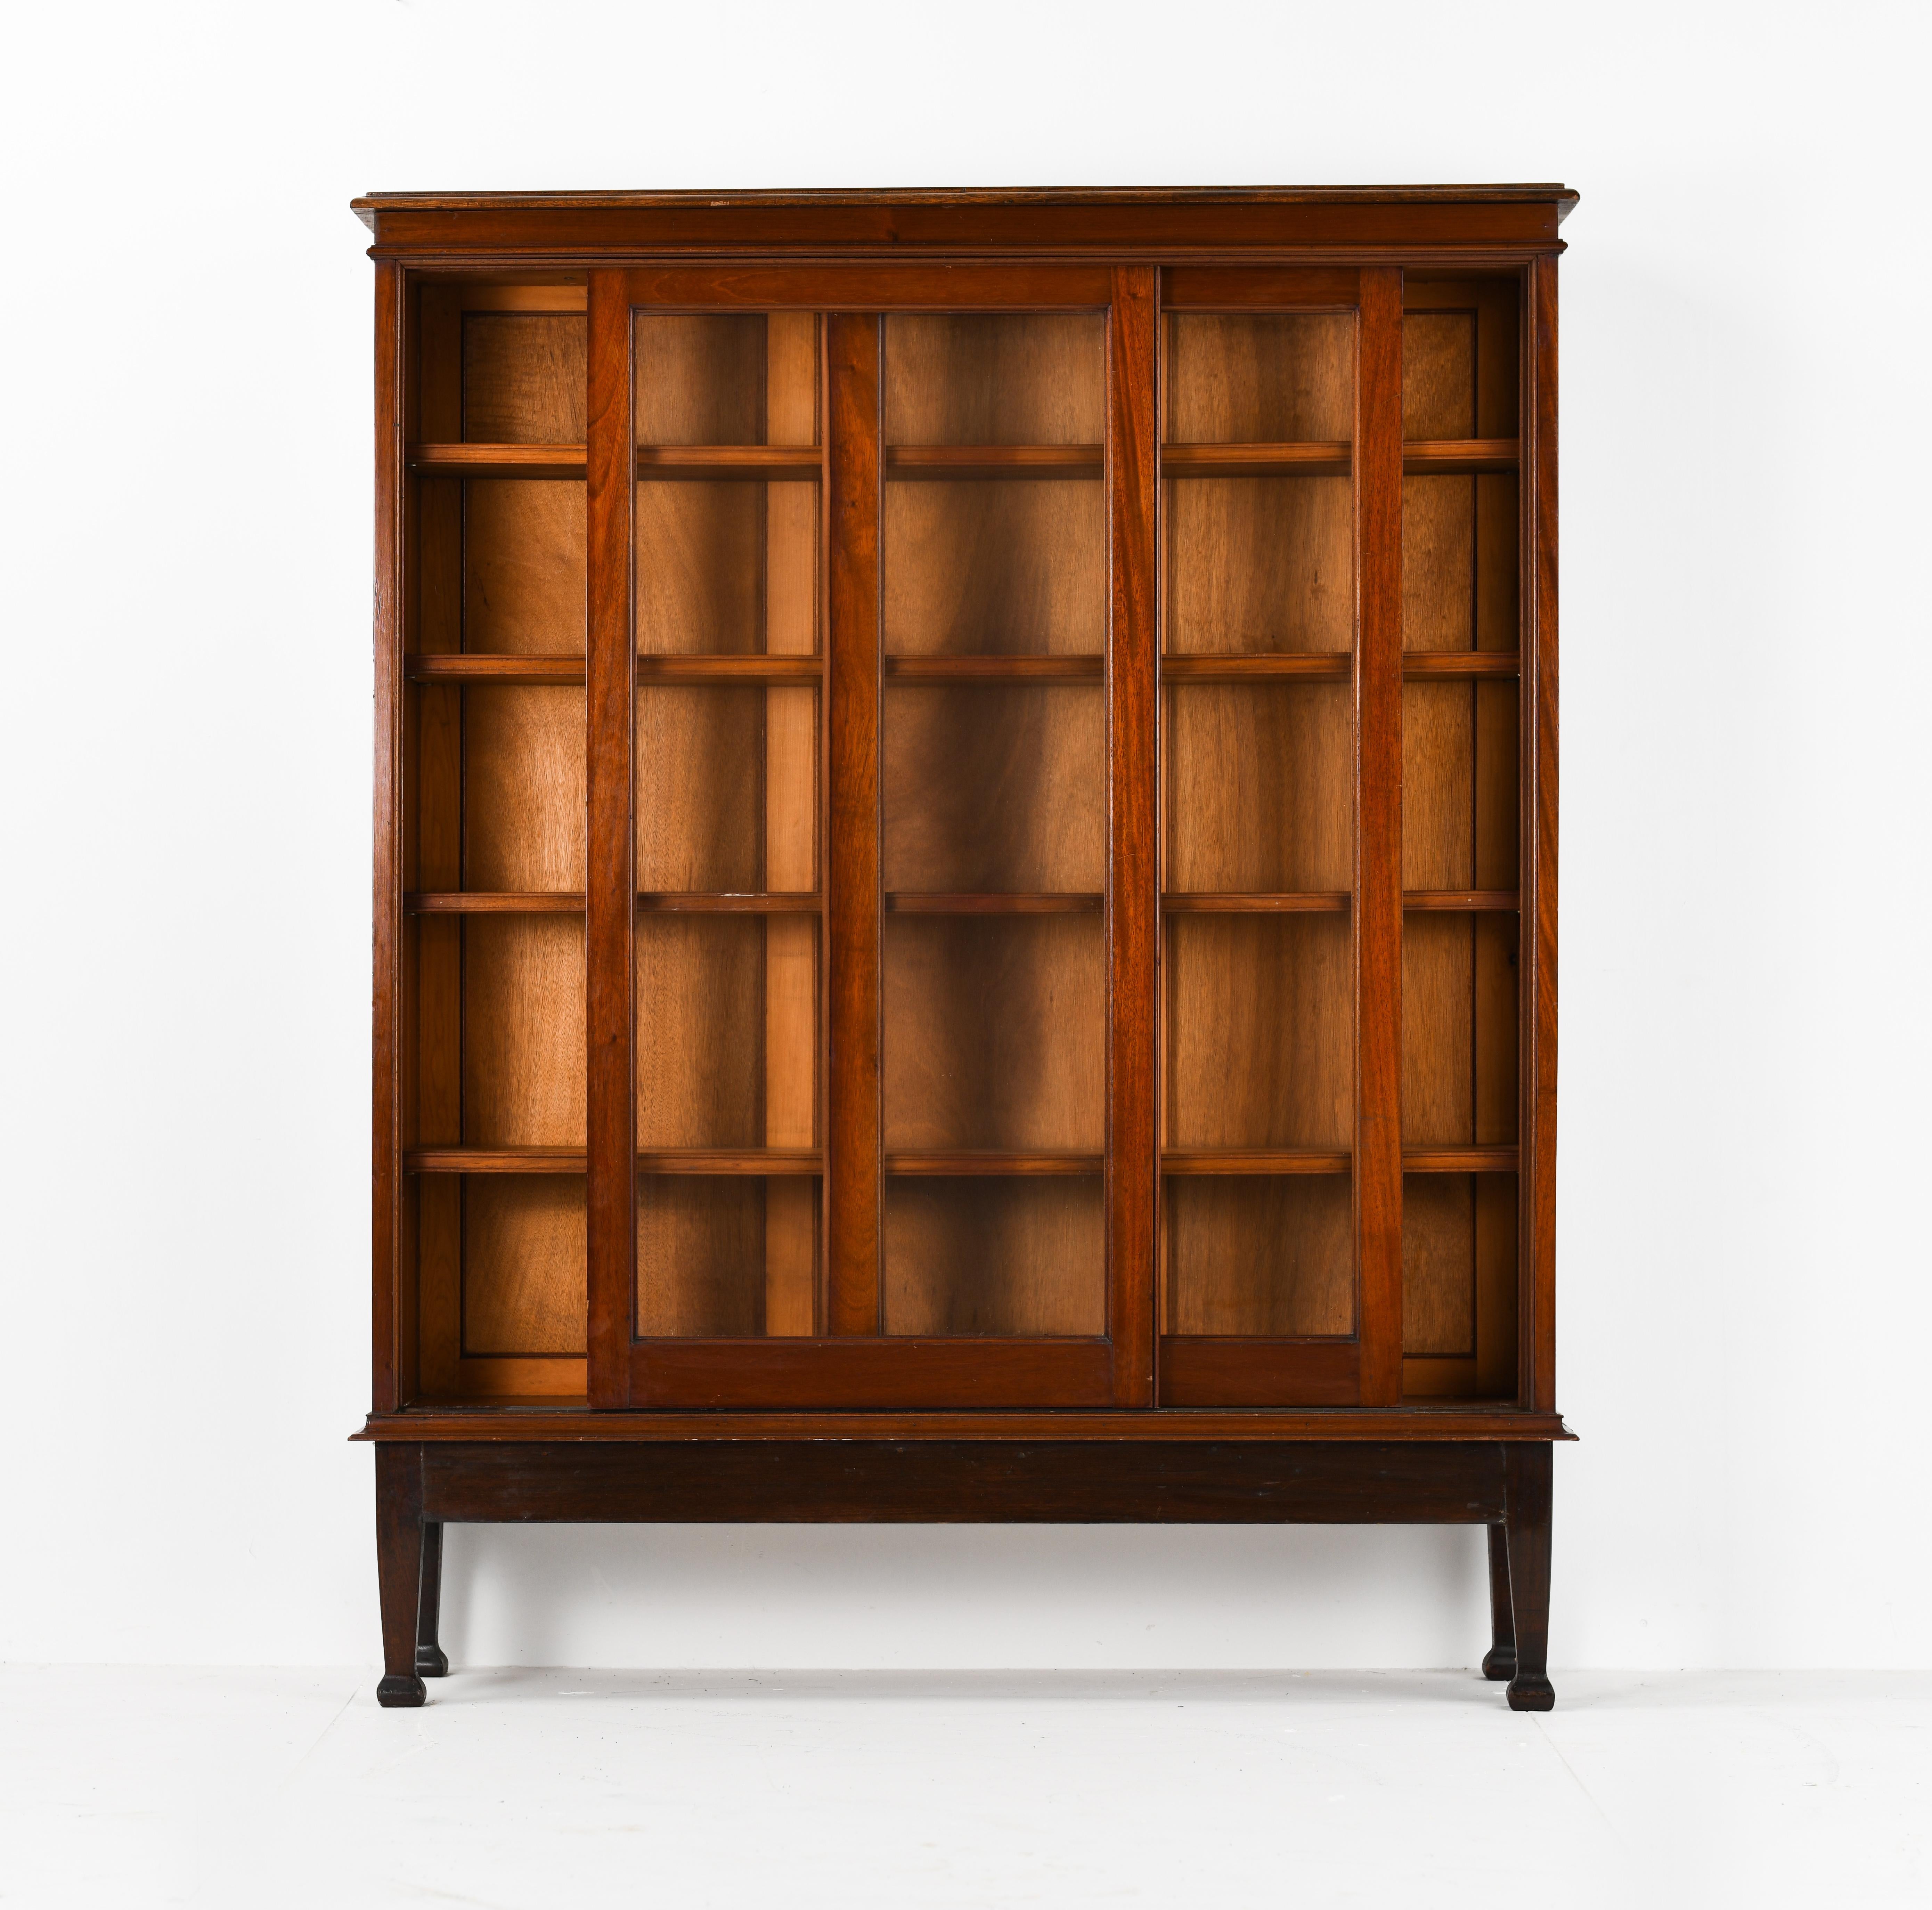 This handsome British Colonial bookcase with very good proportions it’s made from Burmese teak and dates, circa 1950s. This bookcase features a set of sliding glass panel doors teak framed that open to compartments lined with 4 shelves and original